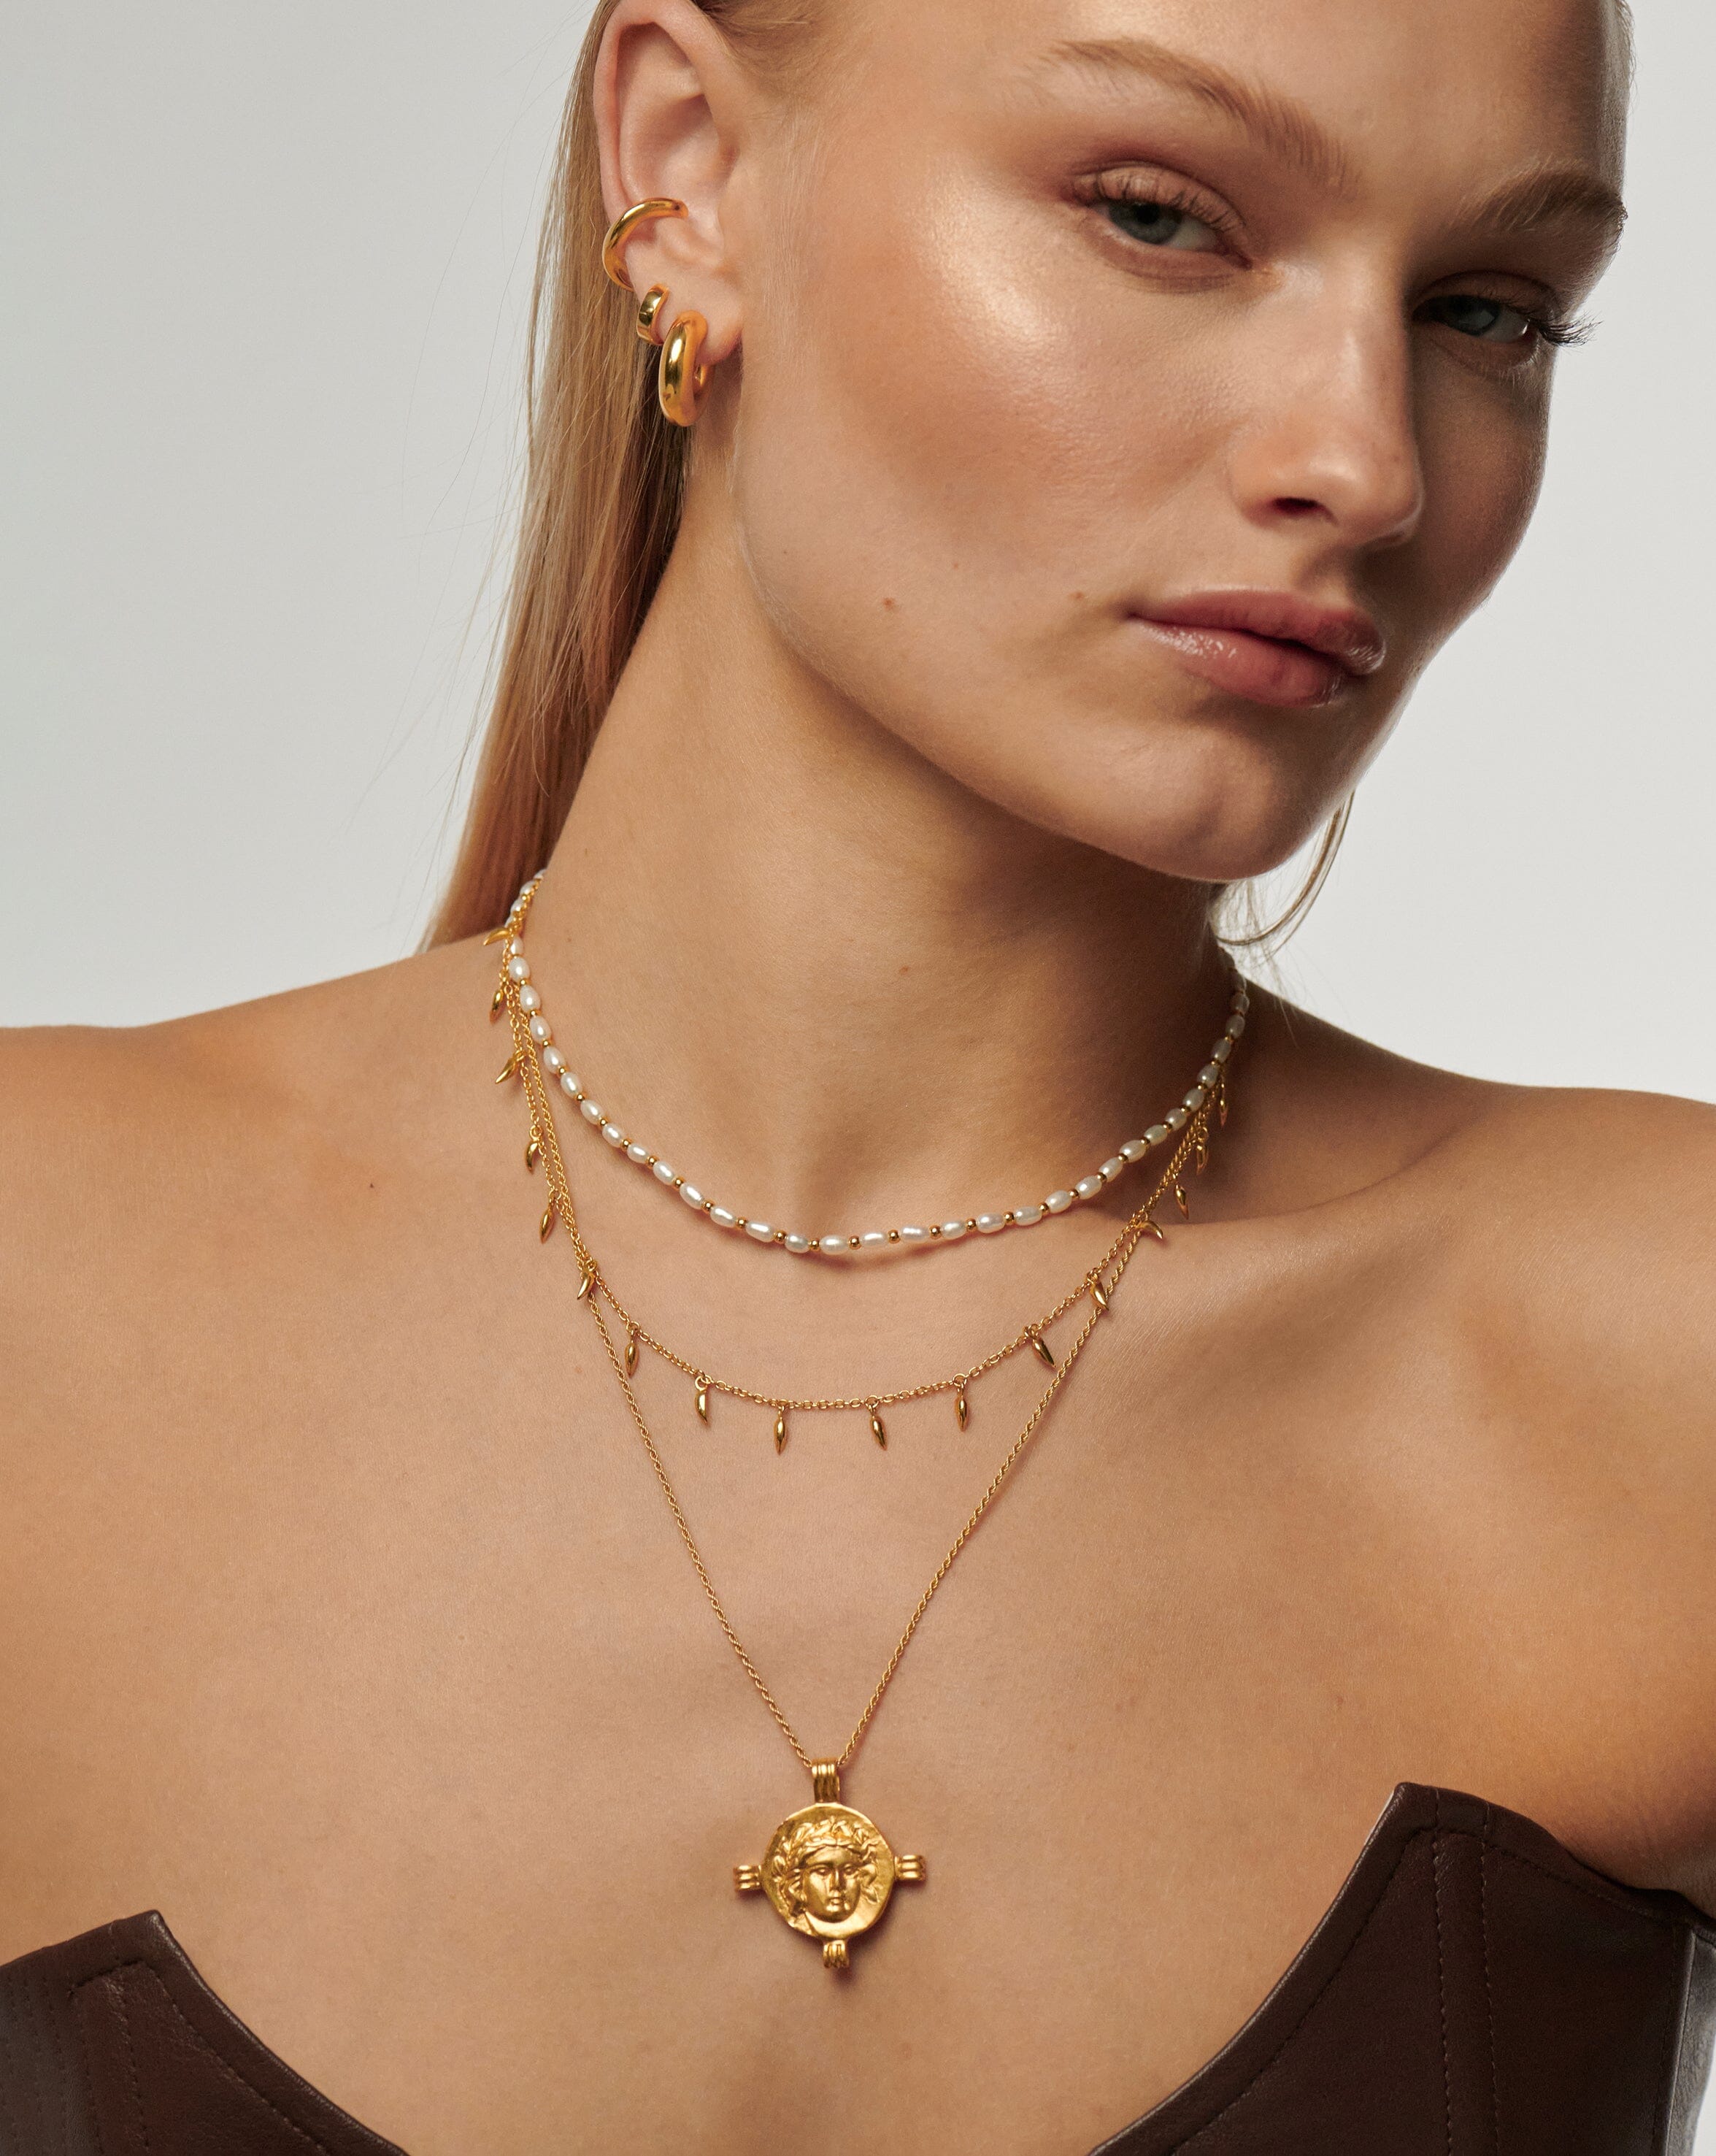 Lucy Williams Apollo Medallion Coin Necklace | 18ct Gold Plated